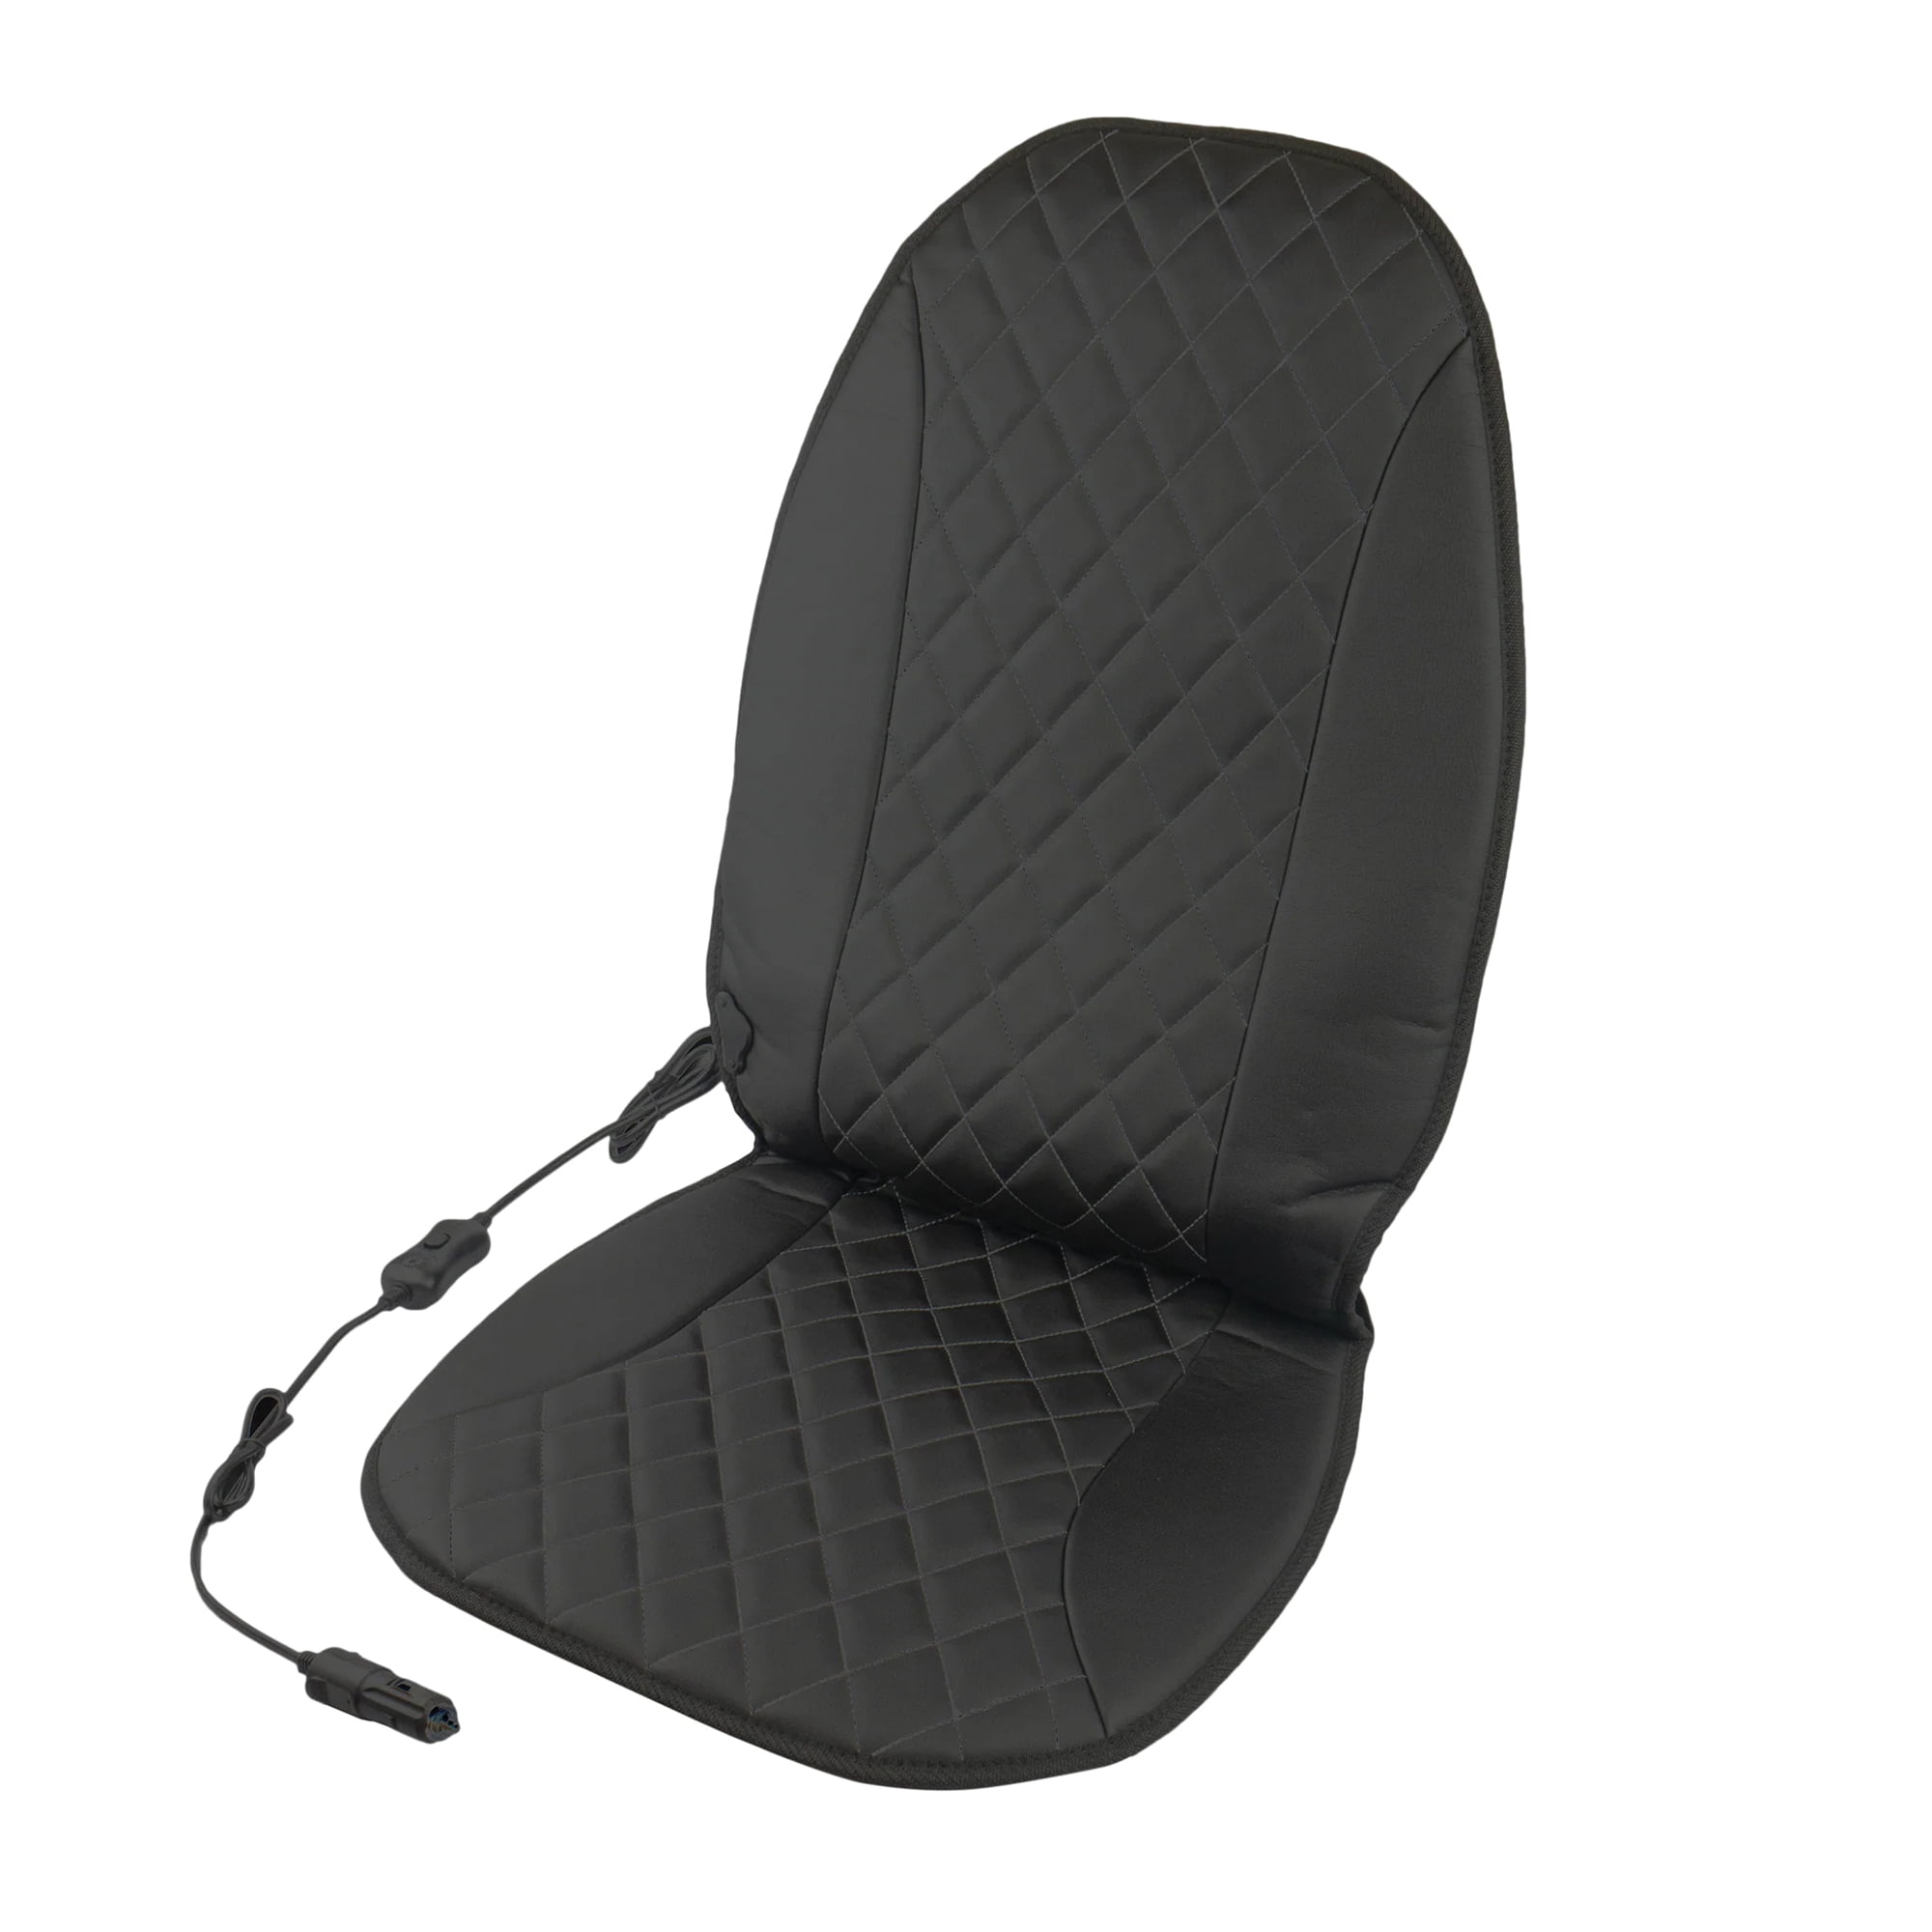 HealthMate 12-Volt 42 in. x 20.5 in. x 0.3 in. Luxury Heated Seat Cushion  IN9432 - The Home Depot